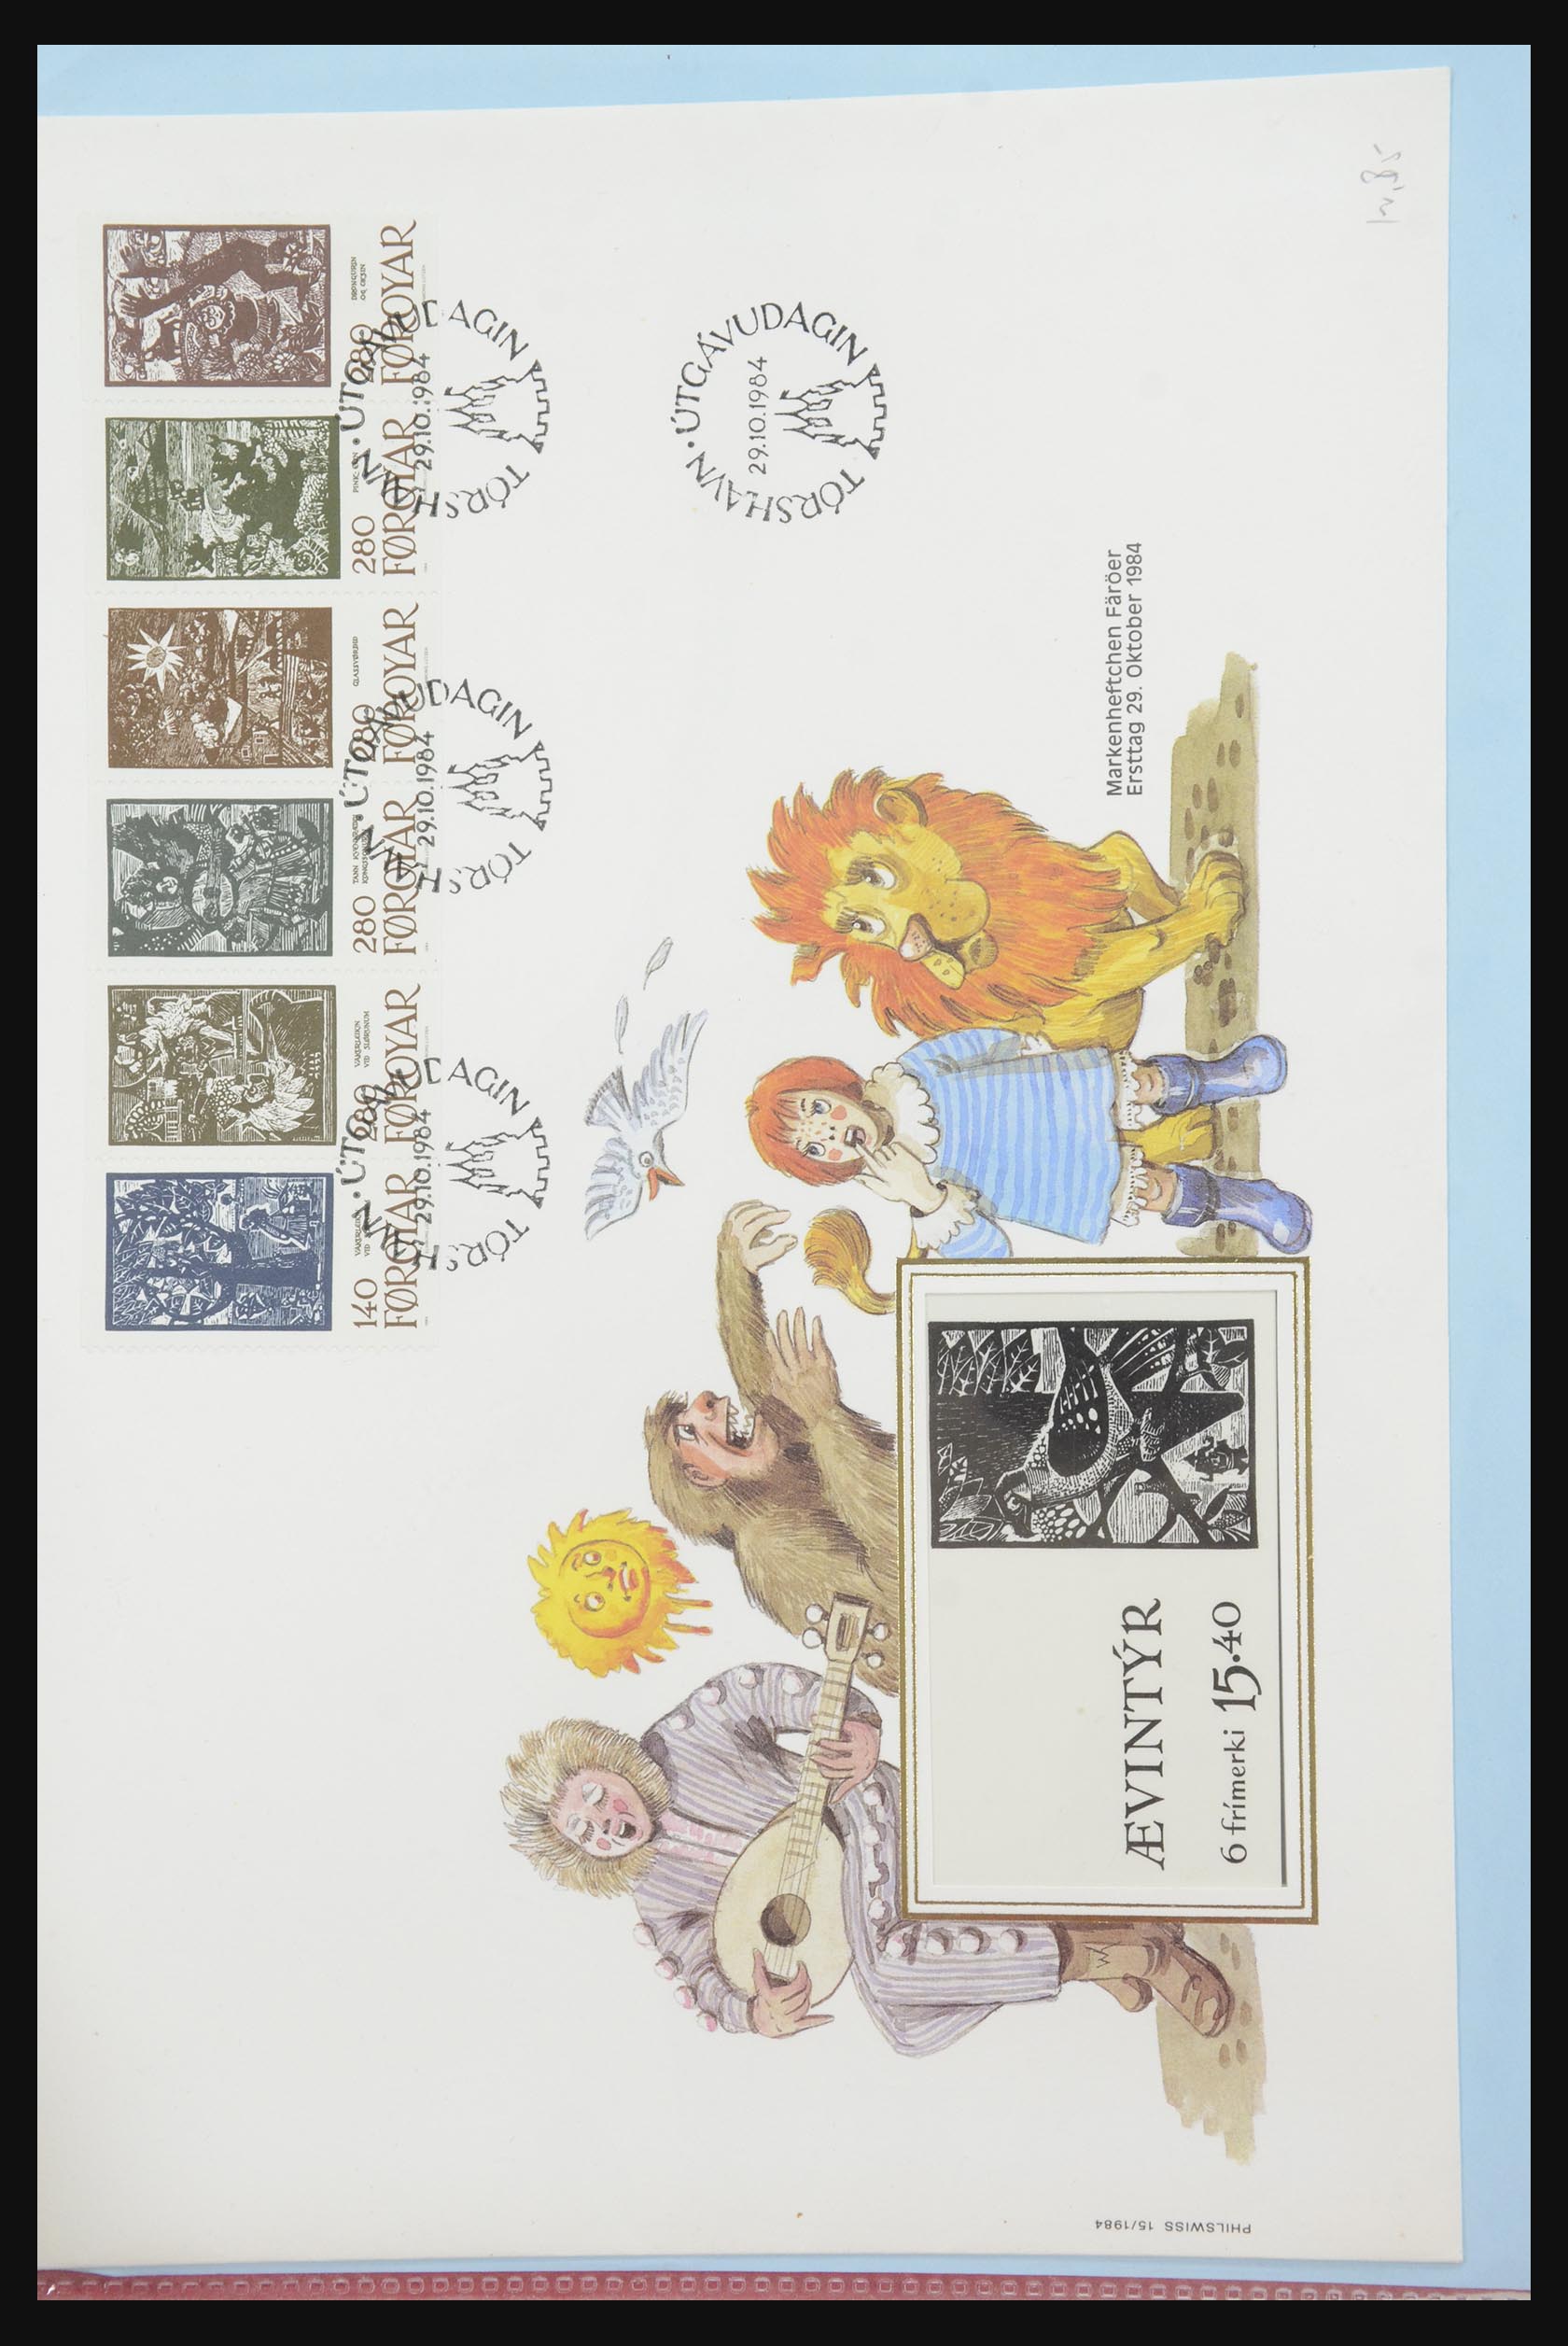 31915 072 - 31915 Western Europe souvenir sheets and stamp booklets on FDC.